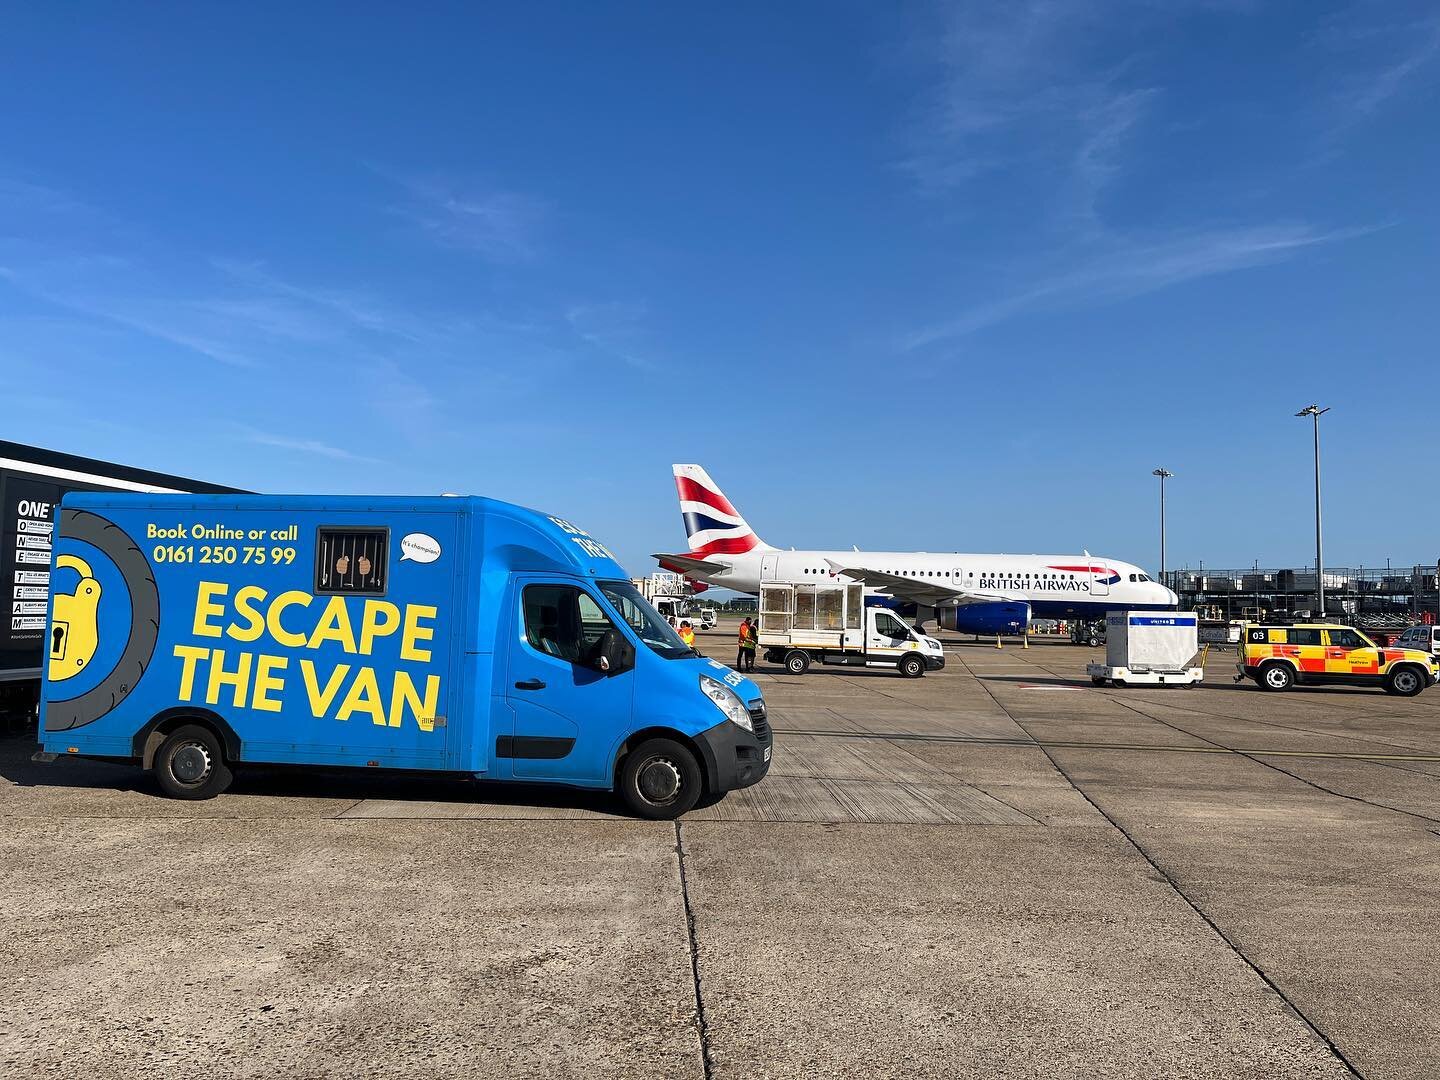 Escape The Van is at @heathrow_airport all this week as part of Airside Safety week!

We have put together a 15 minute escape room within the van itself, that is specific to all things Airside Safety.

Helping drive engagement through fun and memorab